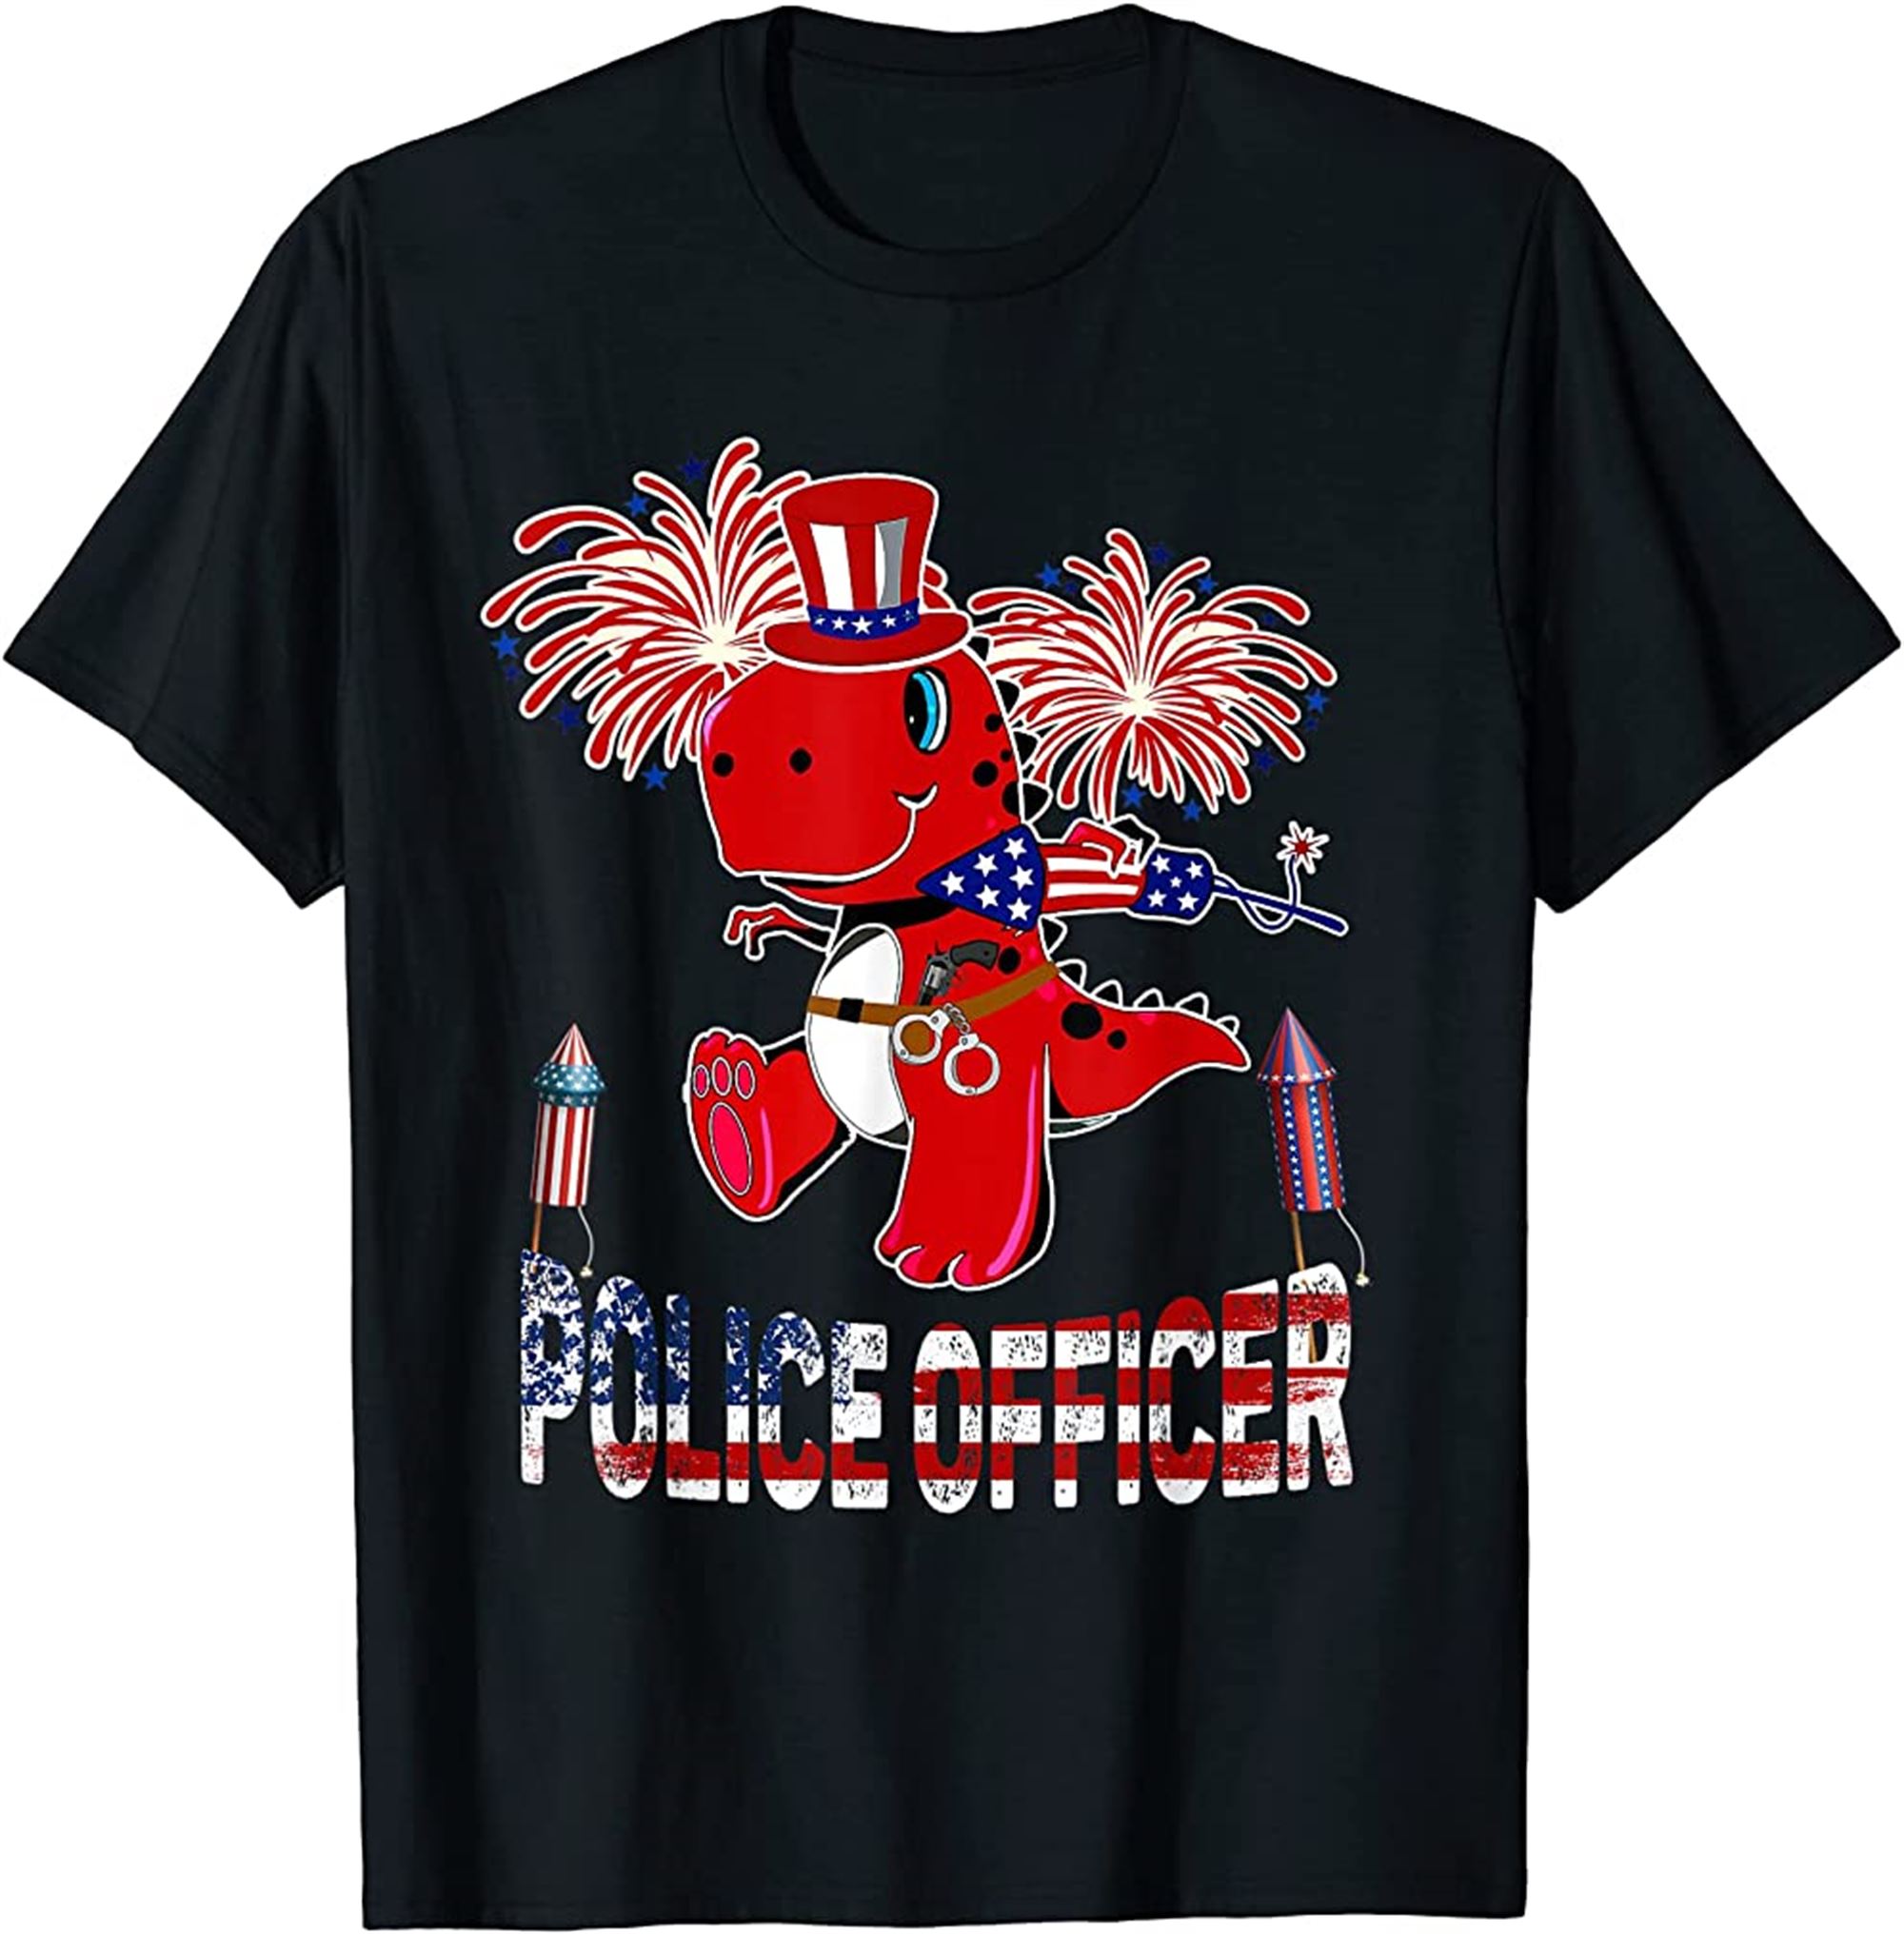 Police Officer American Flag T Rex Fireworks 4th Of July Tshirt Size Up To 5xl